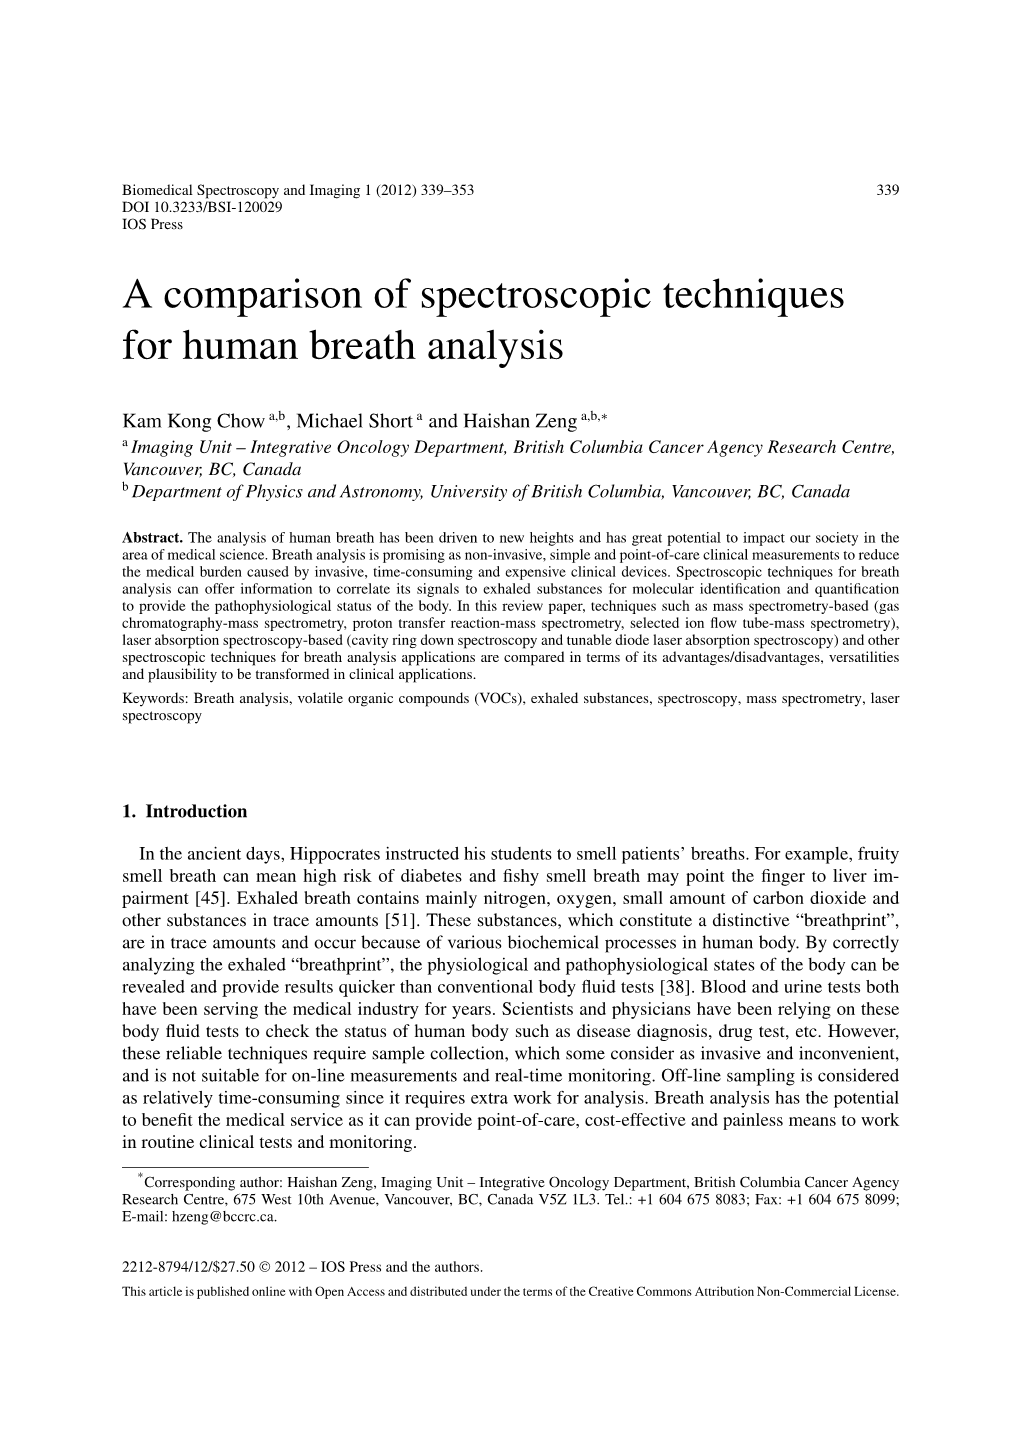 A Comparison of Spectroscopic Techniques for Human Breath Analysis